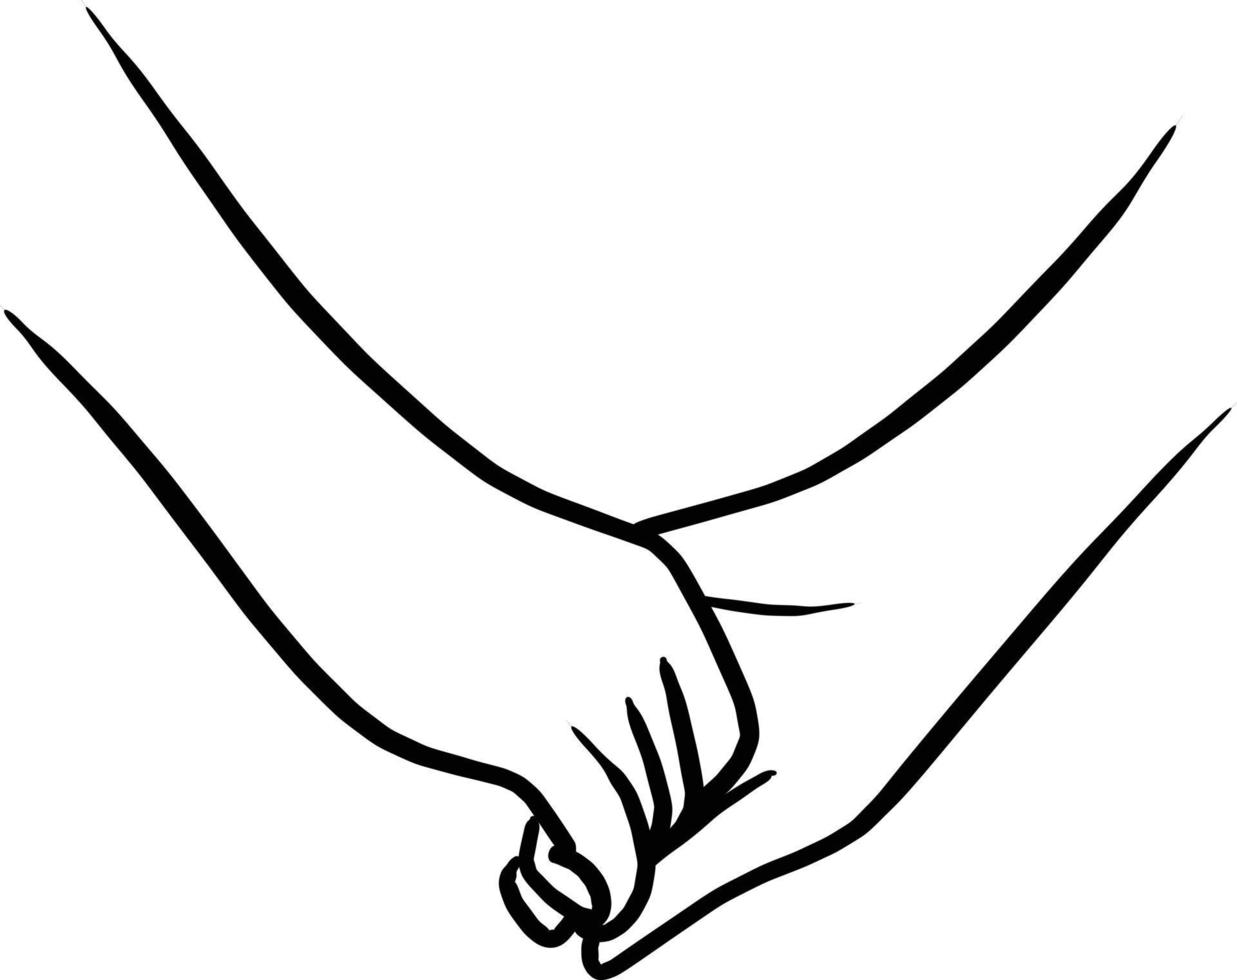 holding hand of lovers vector illustration